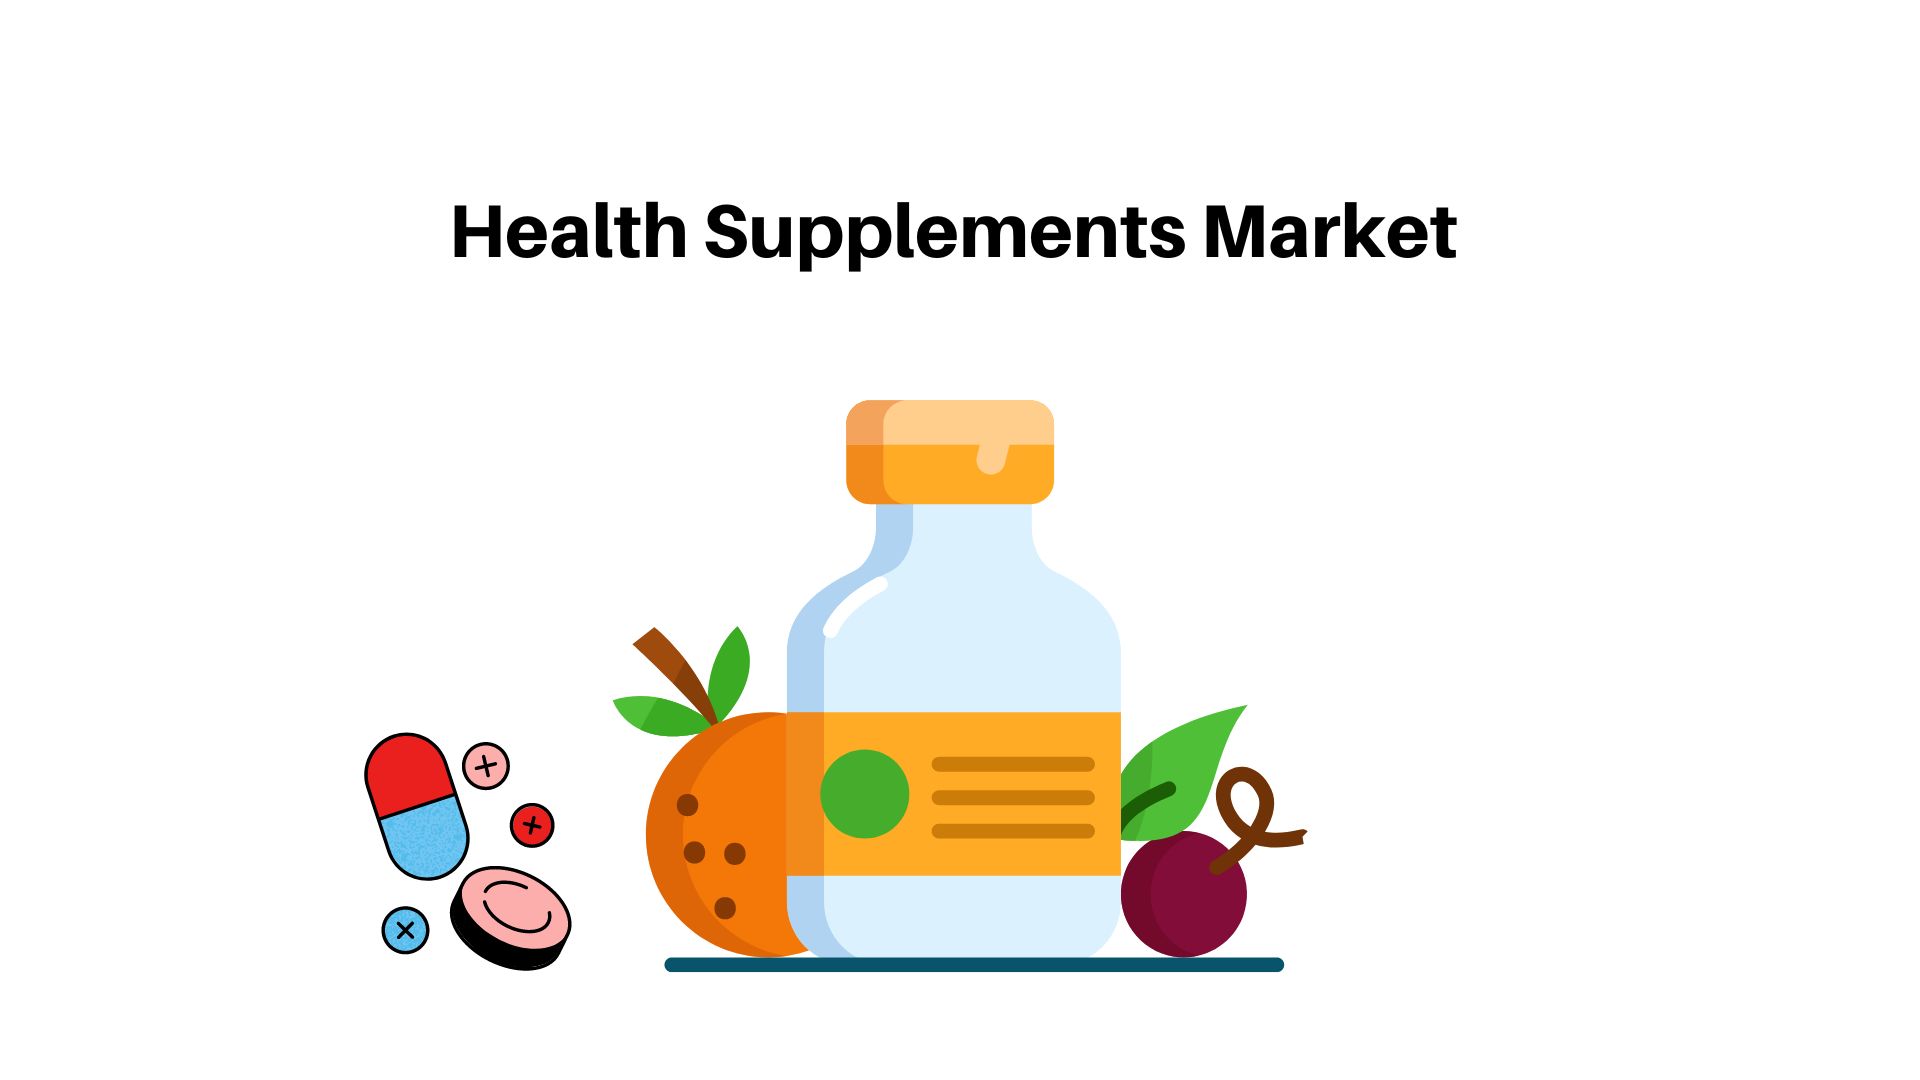 Health Supplements Market Size (USD 537.51 Bn) By 2032